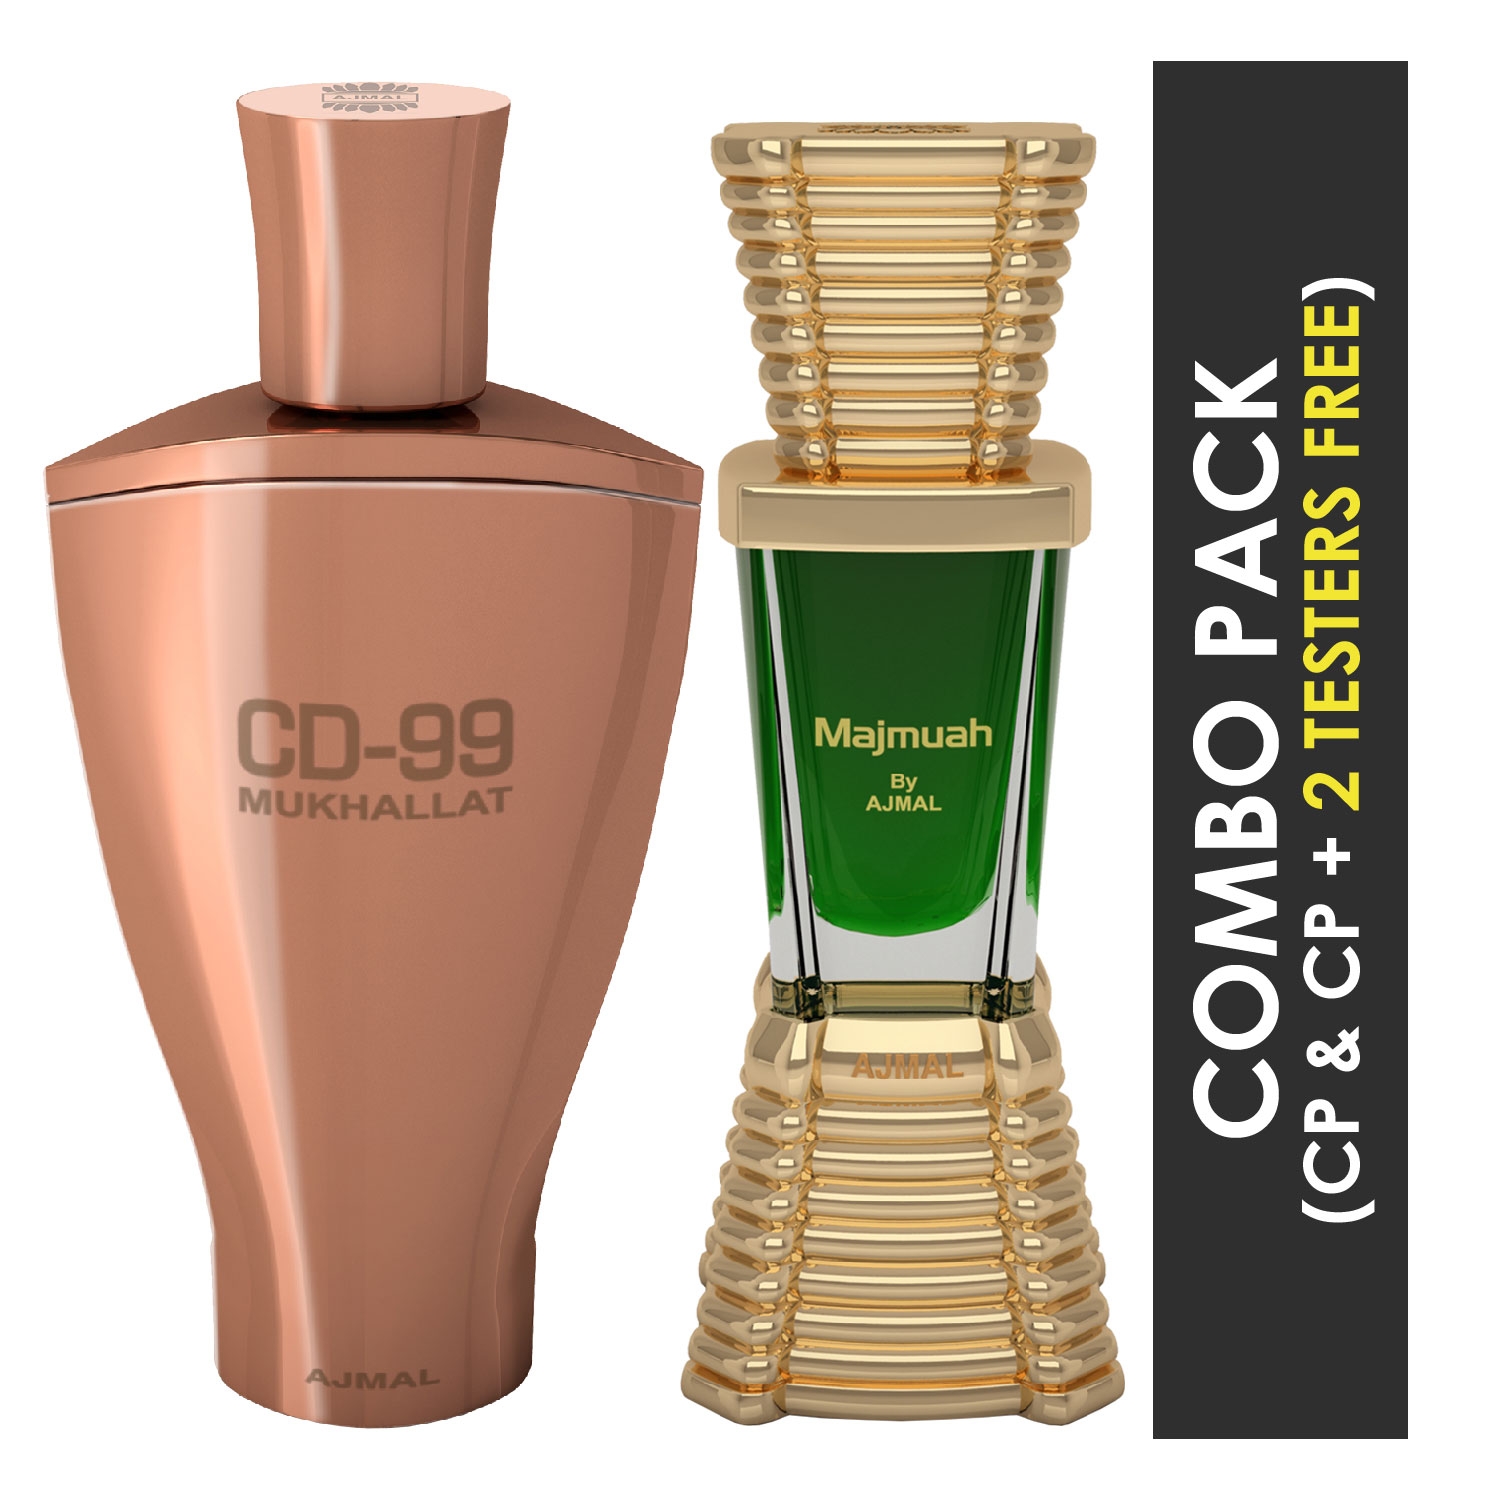 Ajmal | Ajmal CD 99 Mukhallat Concentrated Perfume Attar 14ml for Unisex and Majmua Concentrated Perfume Attar 10ml for Unisex + 2 Parfum Testers FREE